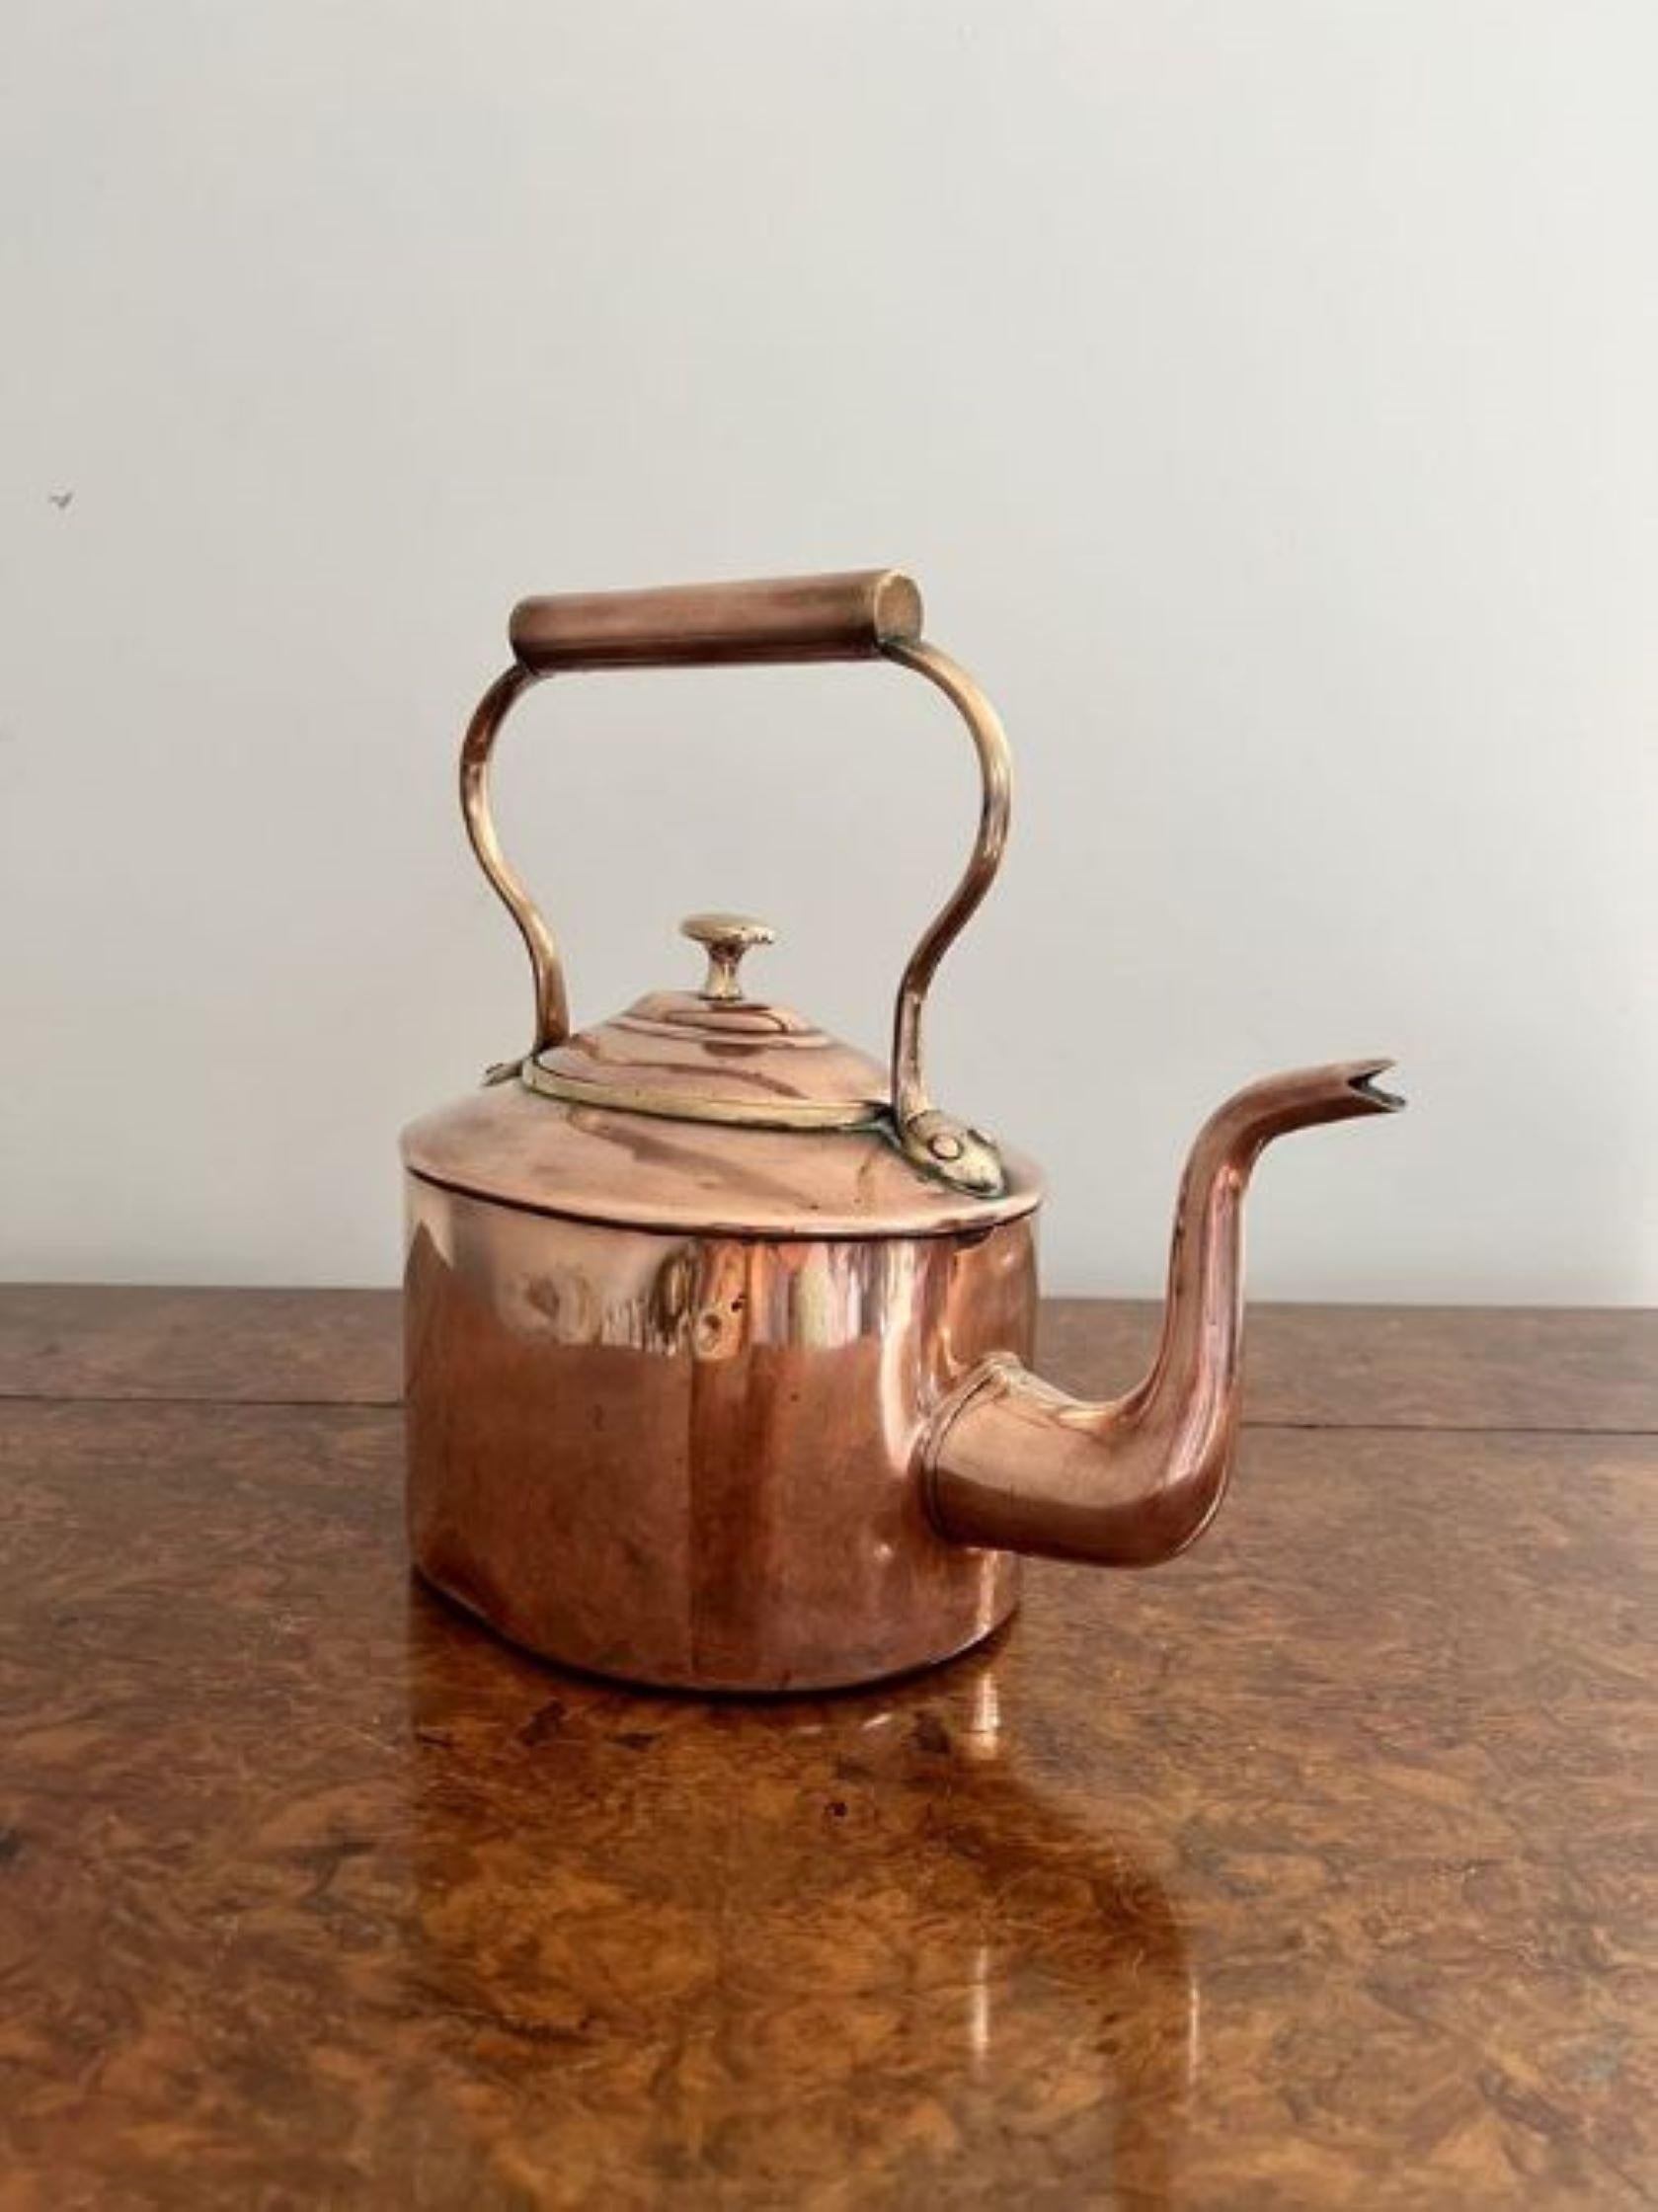 Quality small antique George III copper kettle having a quality copper kettle with a removable lid with the original brass knob having a shaped handle and spout